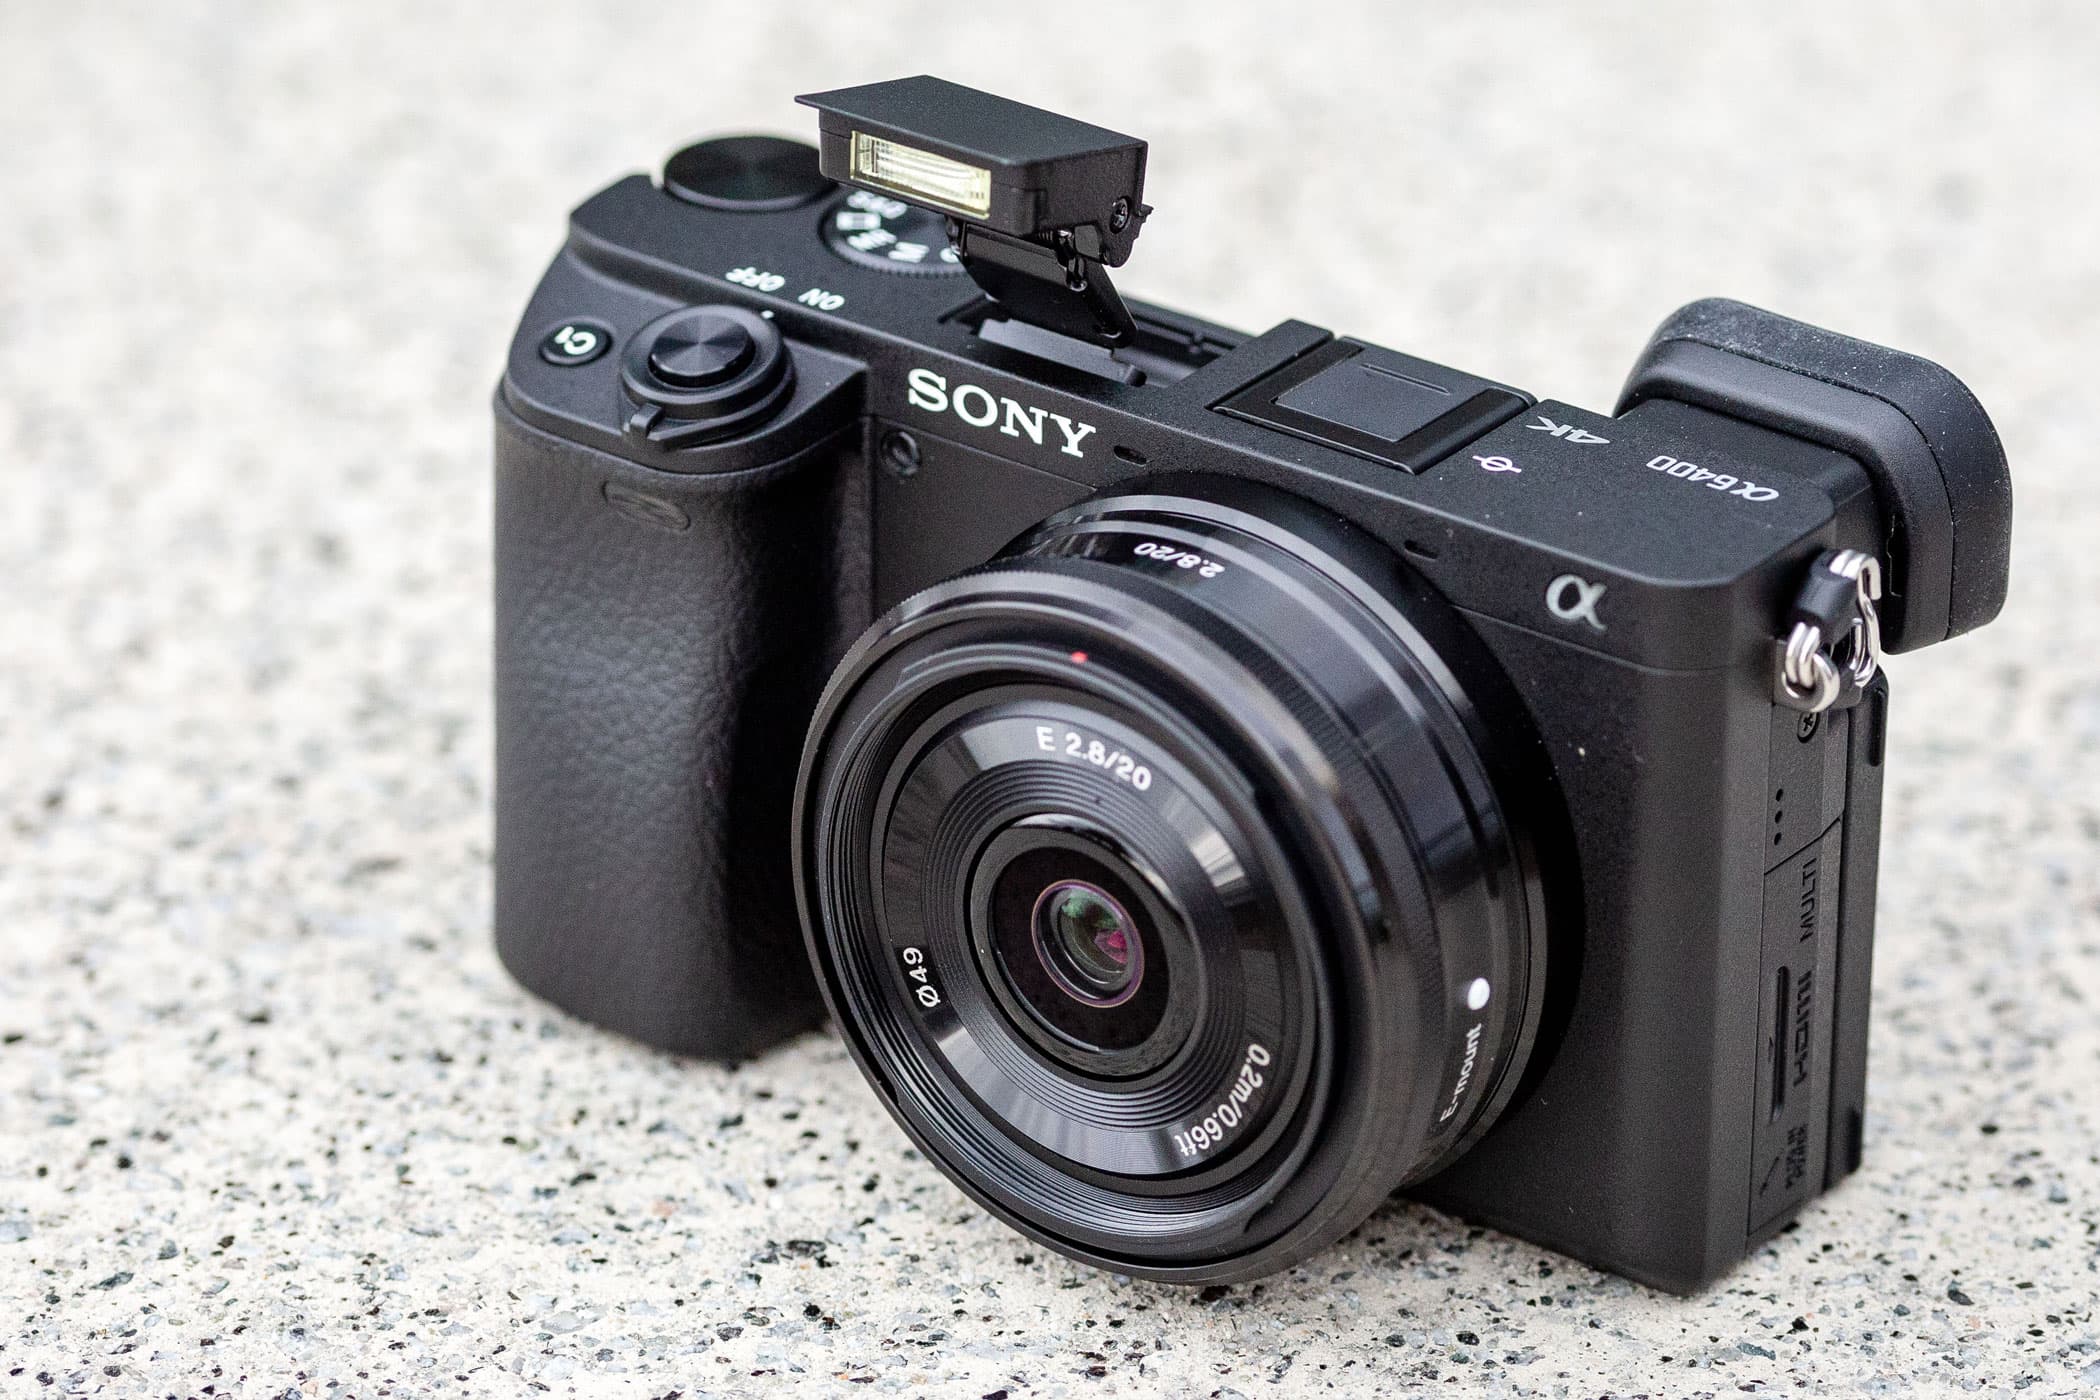 Review: Sony a6100 (The Little Sony Camera That Could)